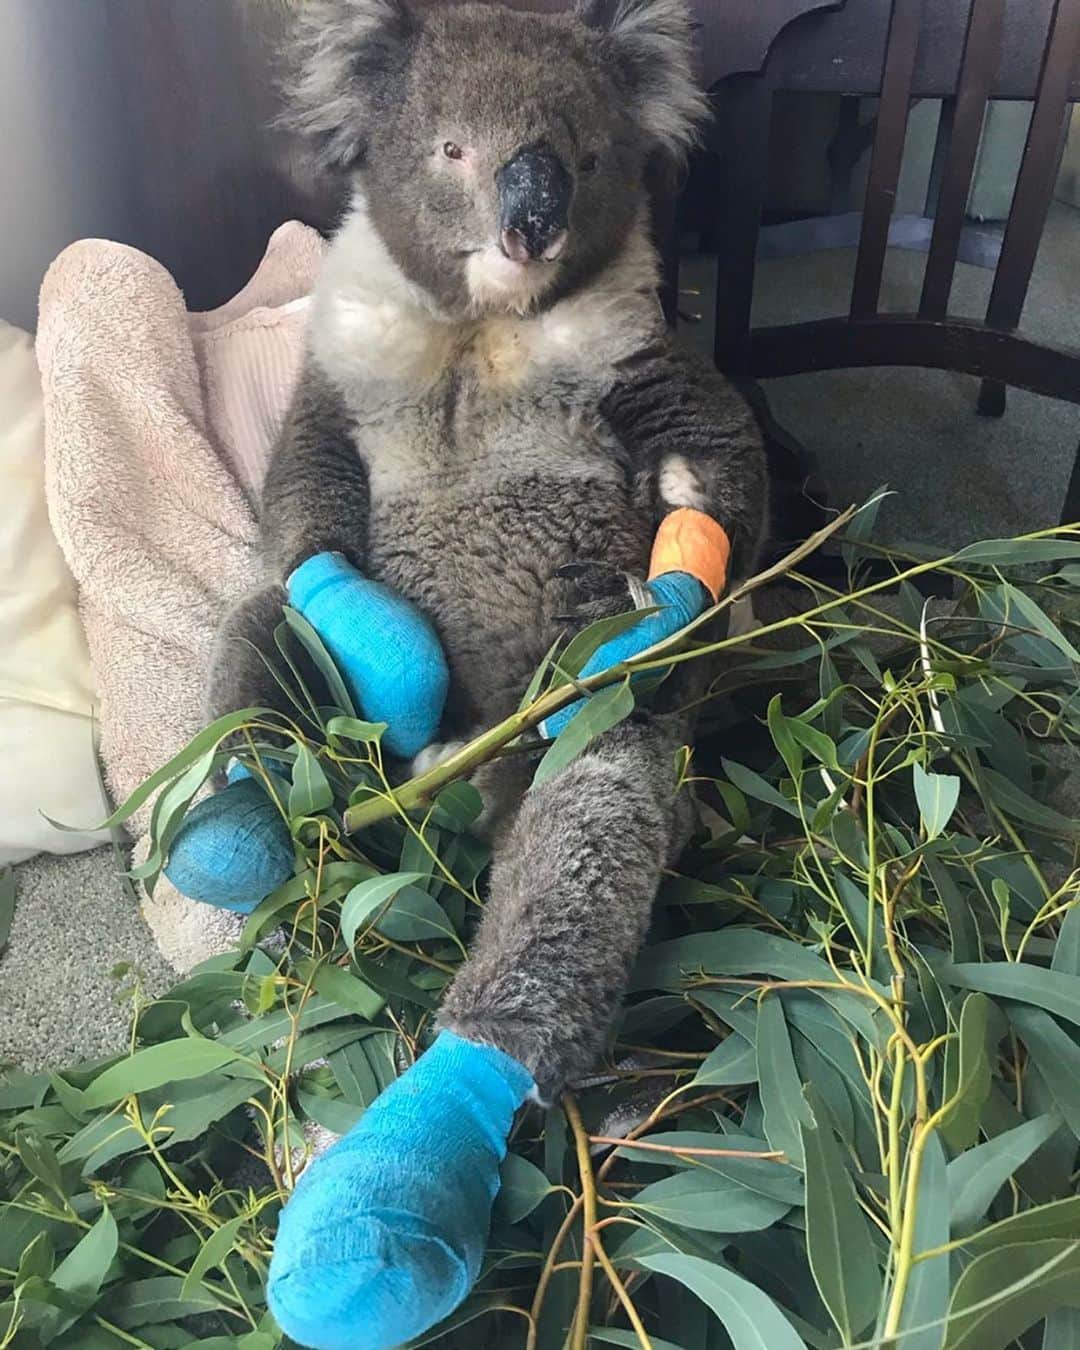 Animalsのインスタグラム：「Meet Billy 😍 Billy was brought out of the bushfire zone on Monday, with four burned paws. He’ll be in care for some time while his paws heal, and having daily dressing changes and treatments at the vets. He’s a very trusting and gentle soul, and his carers are head over heels in love with him ❤️🐨 To contribute to care for the victims of this tragedy, please see the link in @1300koalaz bio 🐨🍃 If you see an orphaned, sick or injured koala please call @1300koalaz on 1300 562529 24/7. Other great causes to donate to in Australia include: @wireswildliferescue www.wires.org.au www.koalahospital.org.au www.redcross.org.au www.cfa.vic.gov.au  www.givit.org.au  www.cfsfoundation.org.au」